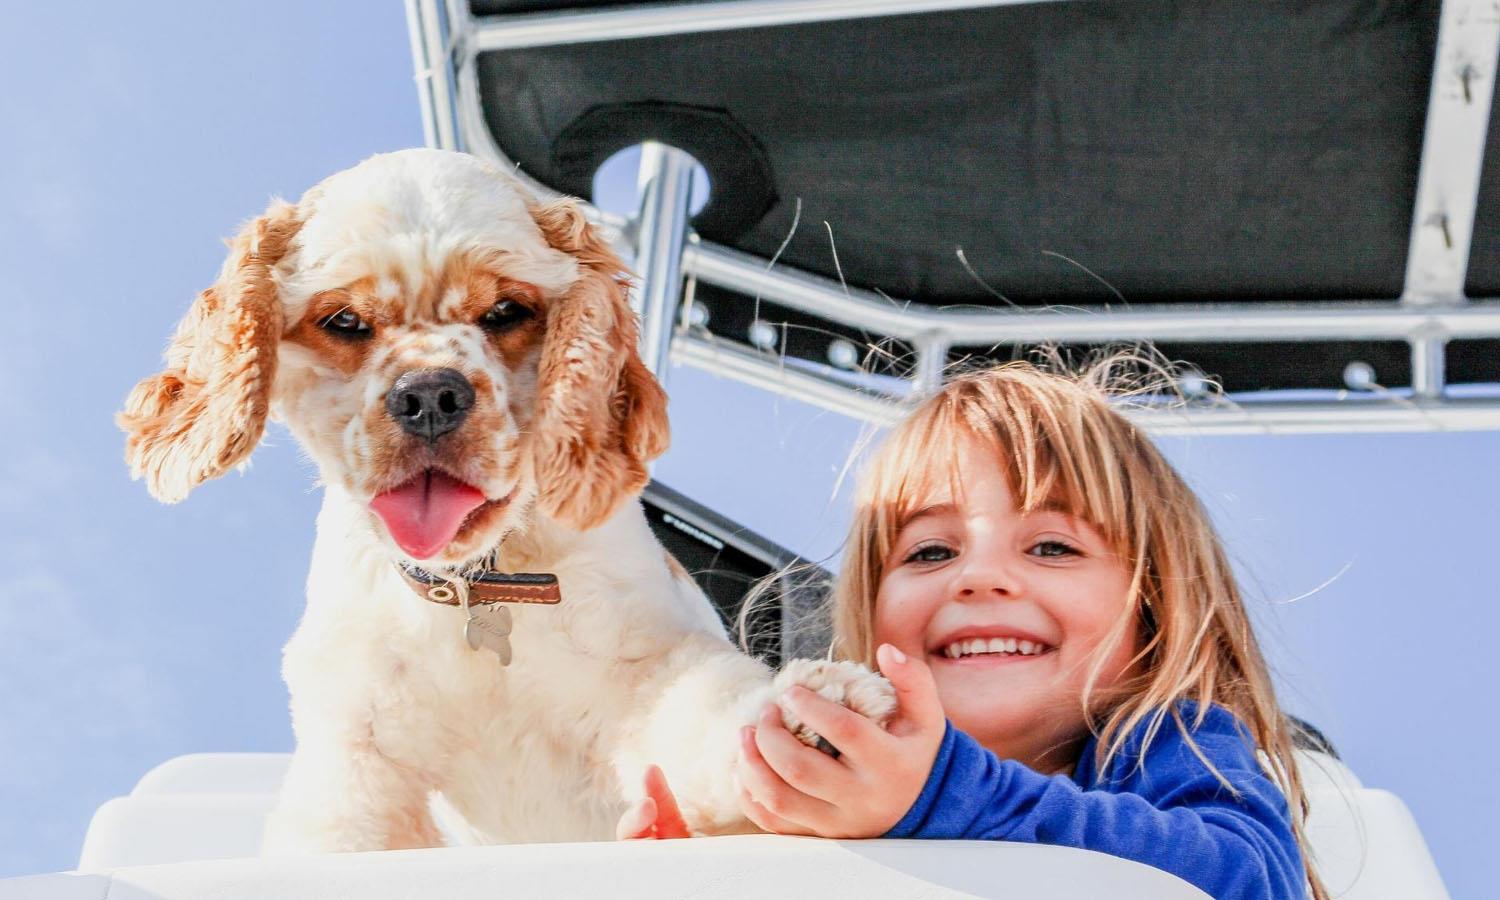 Dog with girl on boat